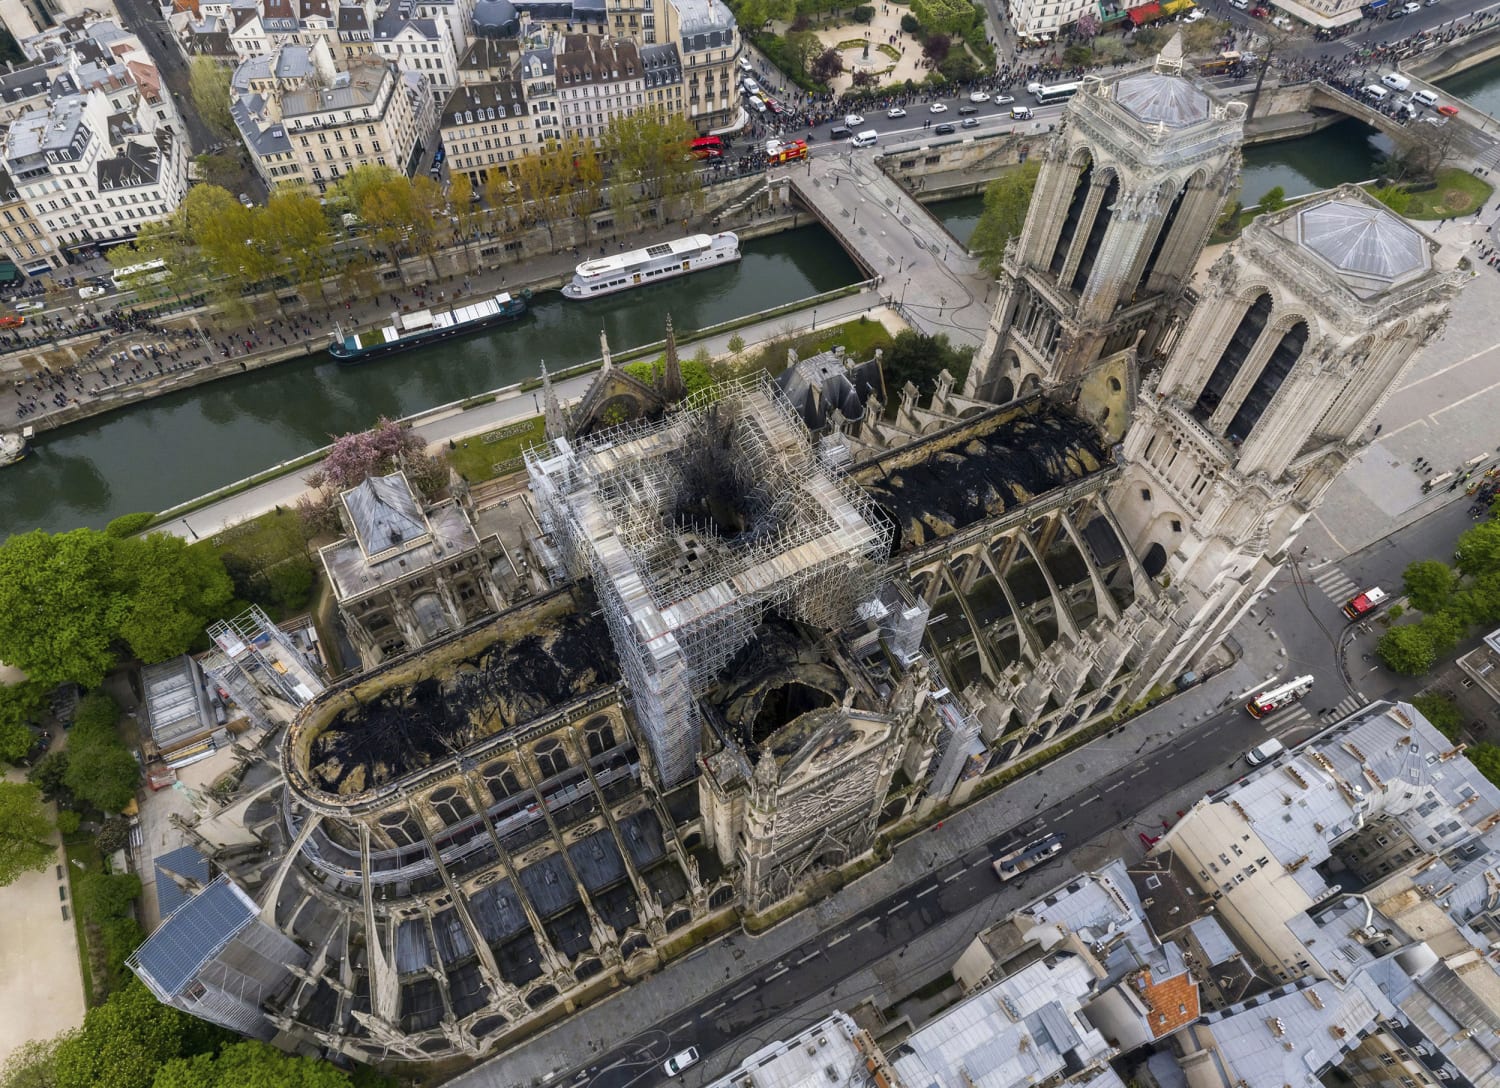 France's Dame cathedral secured and ready to be rebuilt